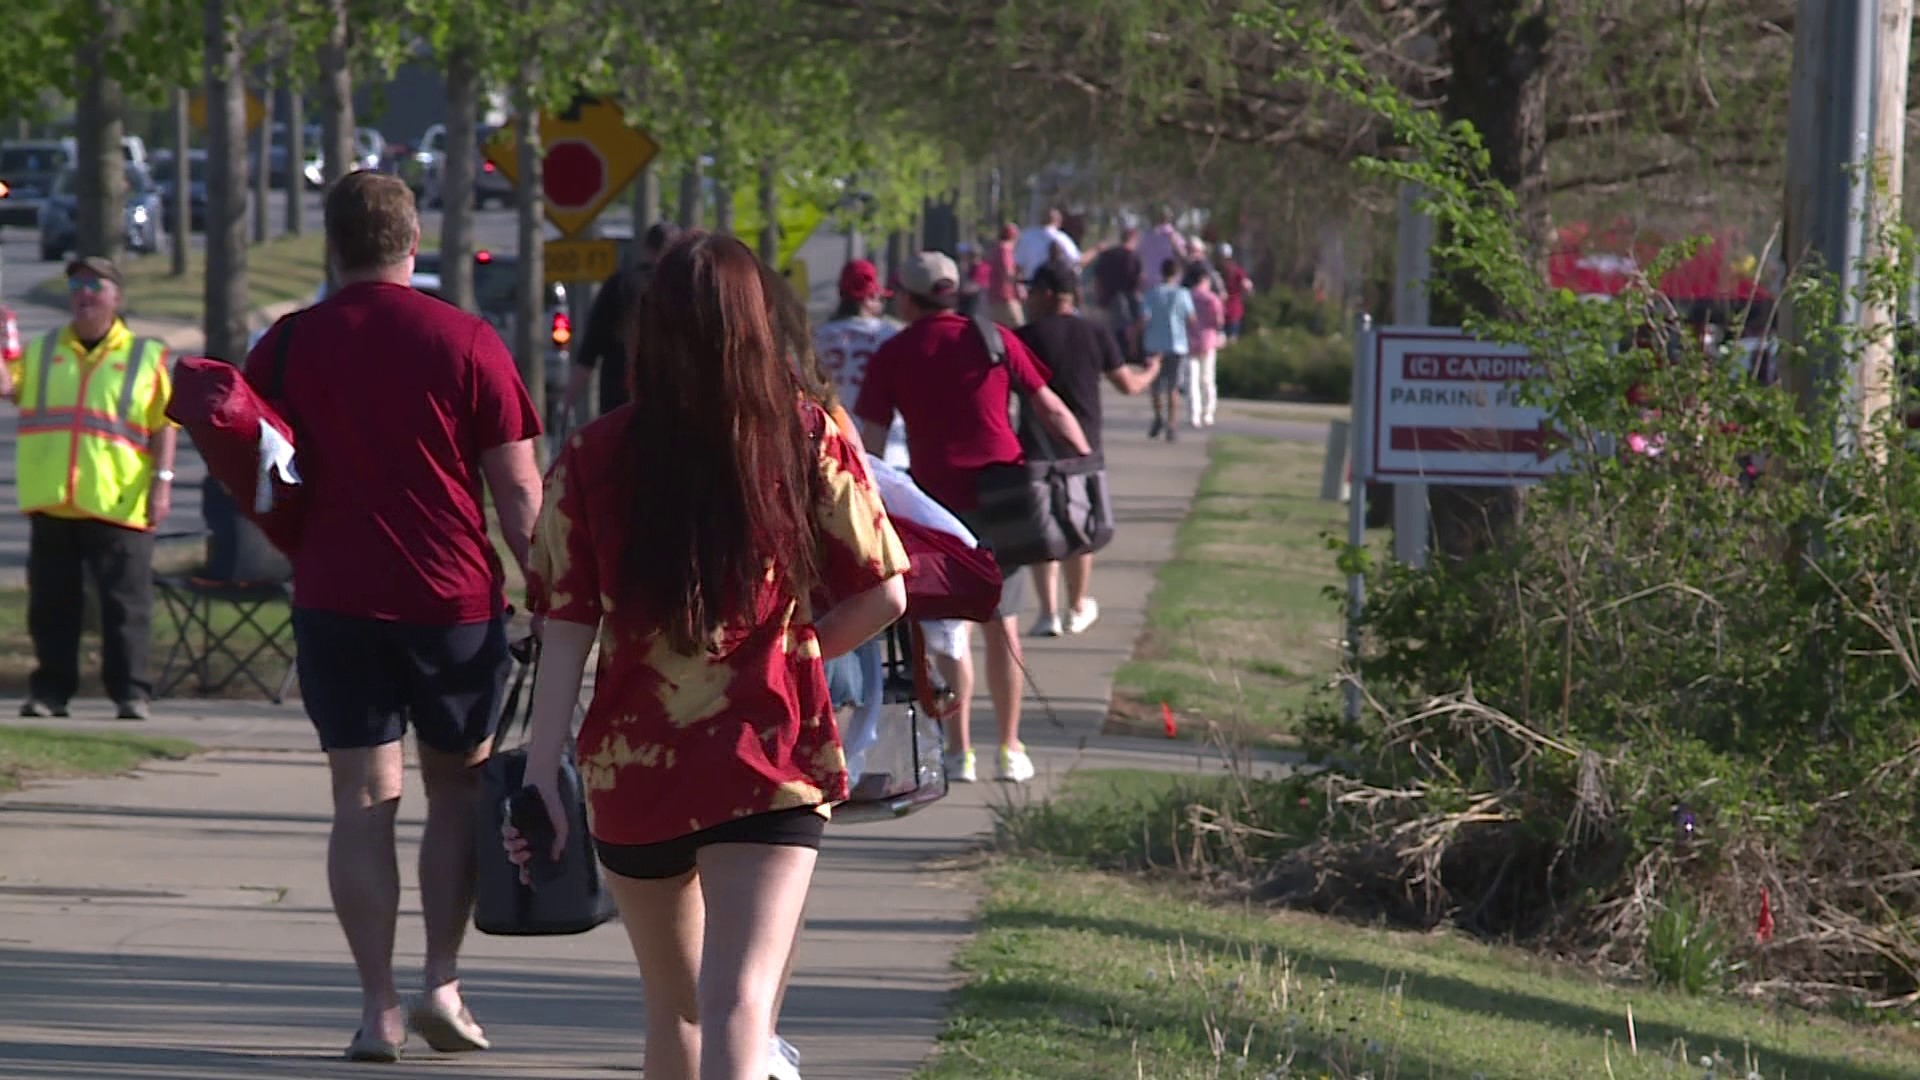 Thousands are descending on the University of Arkansas as several athletic teams compete during "Woo Pig Weekend."